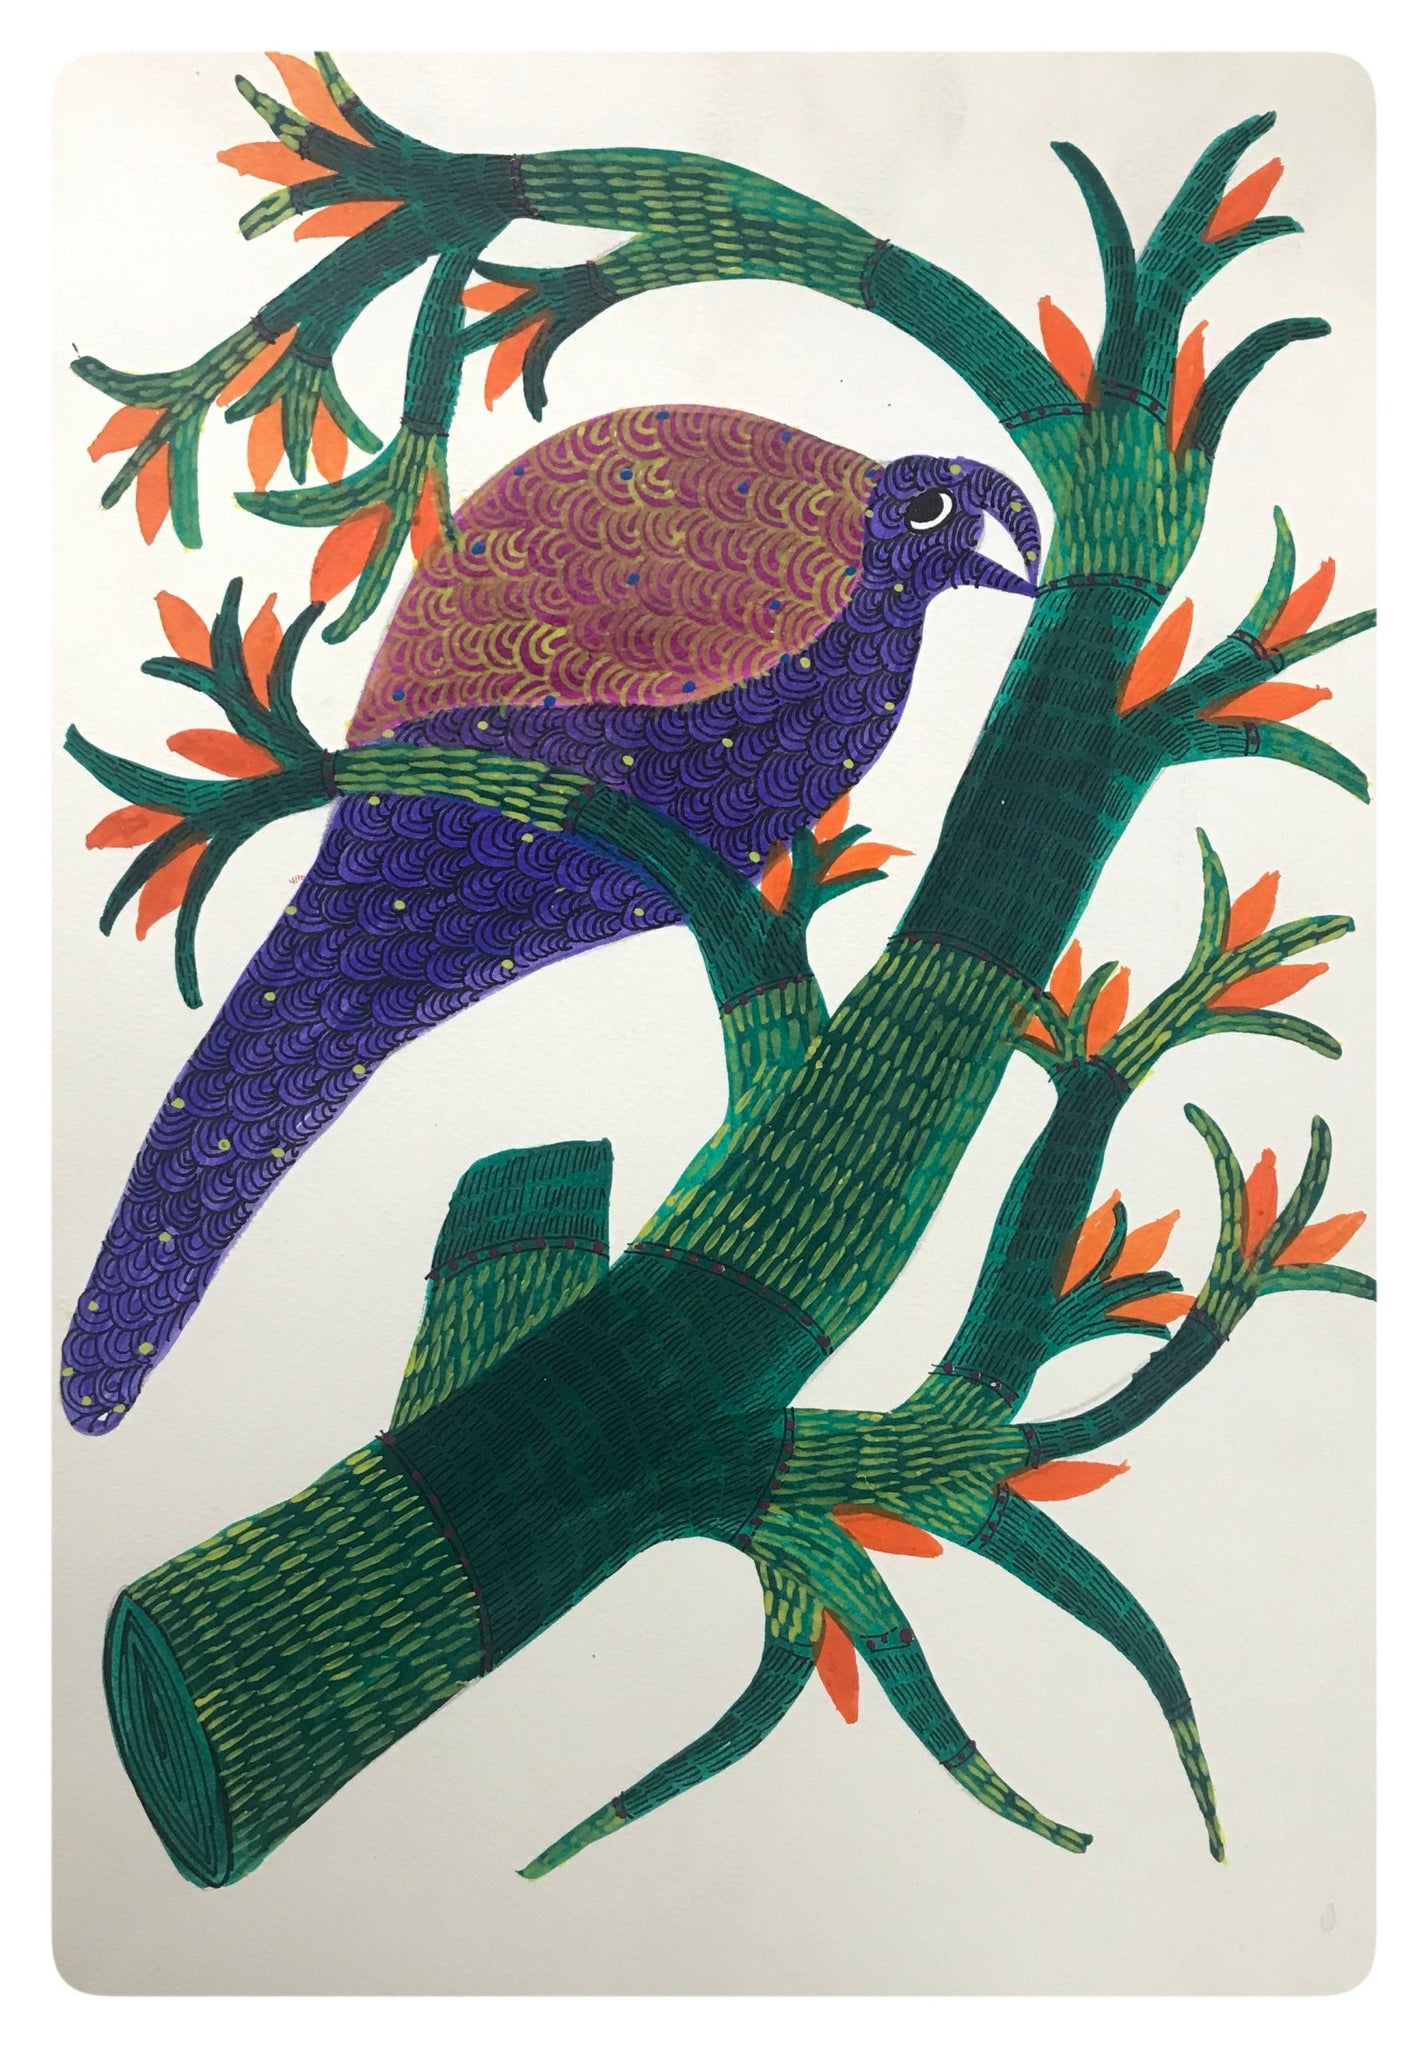 Experience the Splendor of Traditional Gond Art with the Bird on Tree Painting GD008